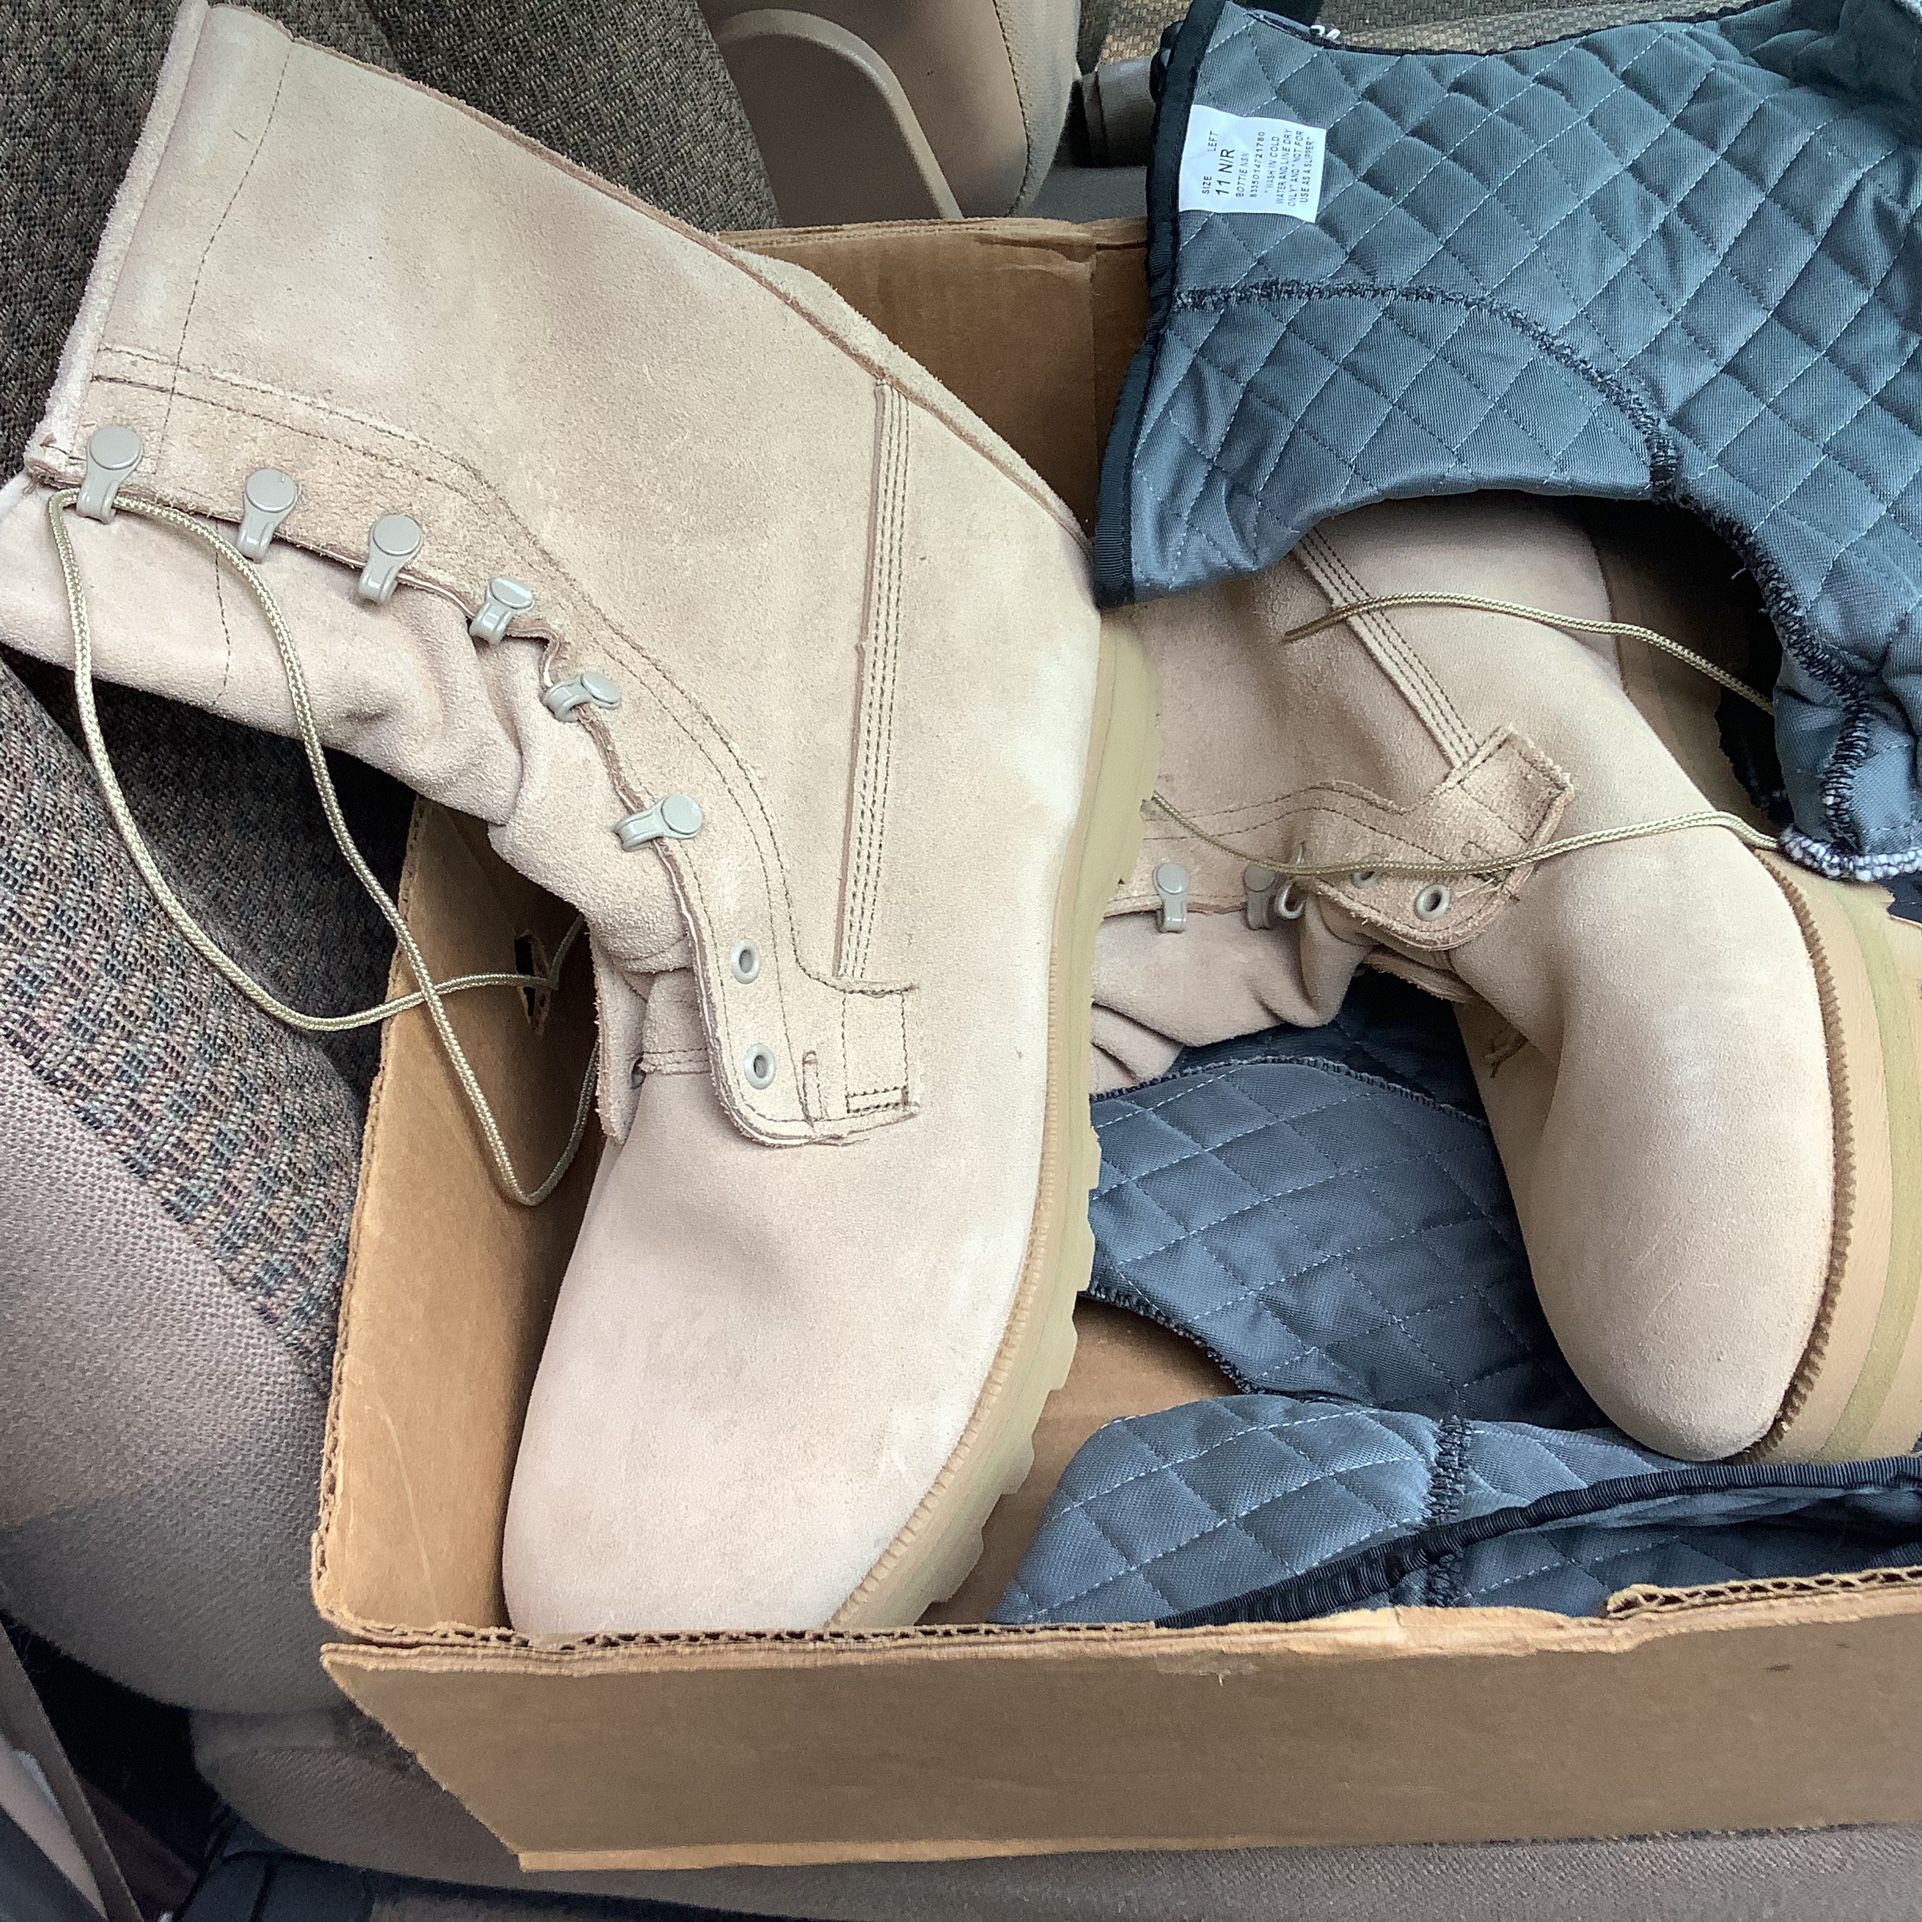 Military boots 11 1/2 Size ( New still In Box ) 